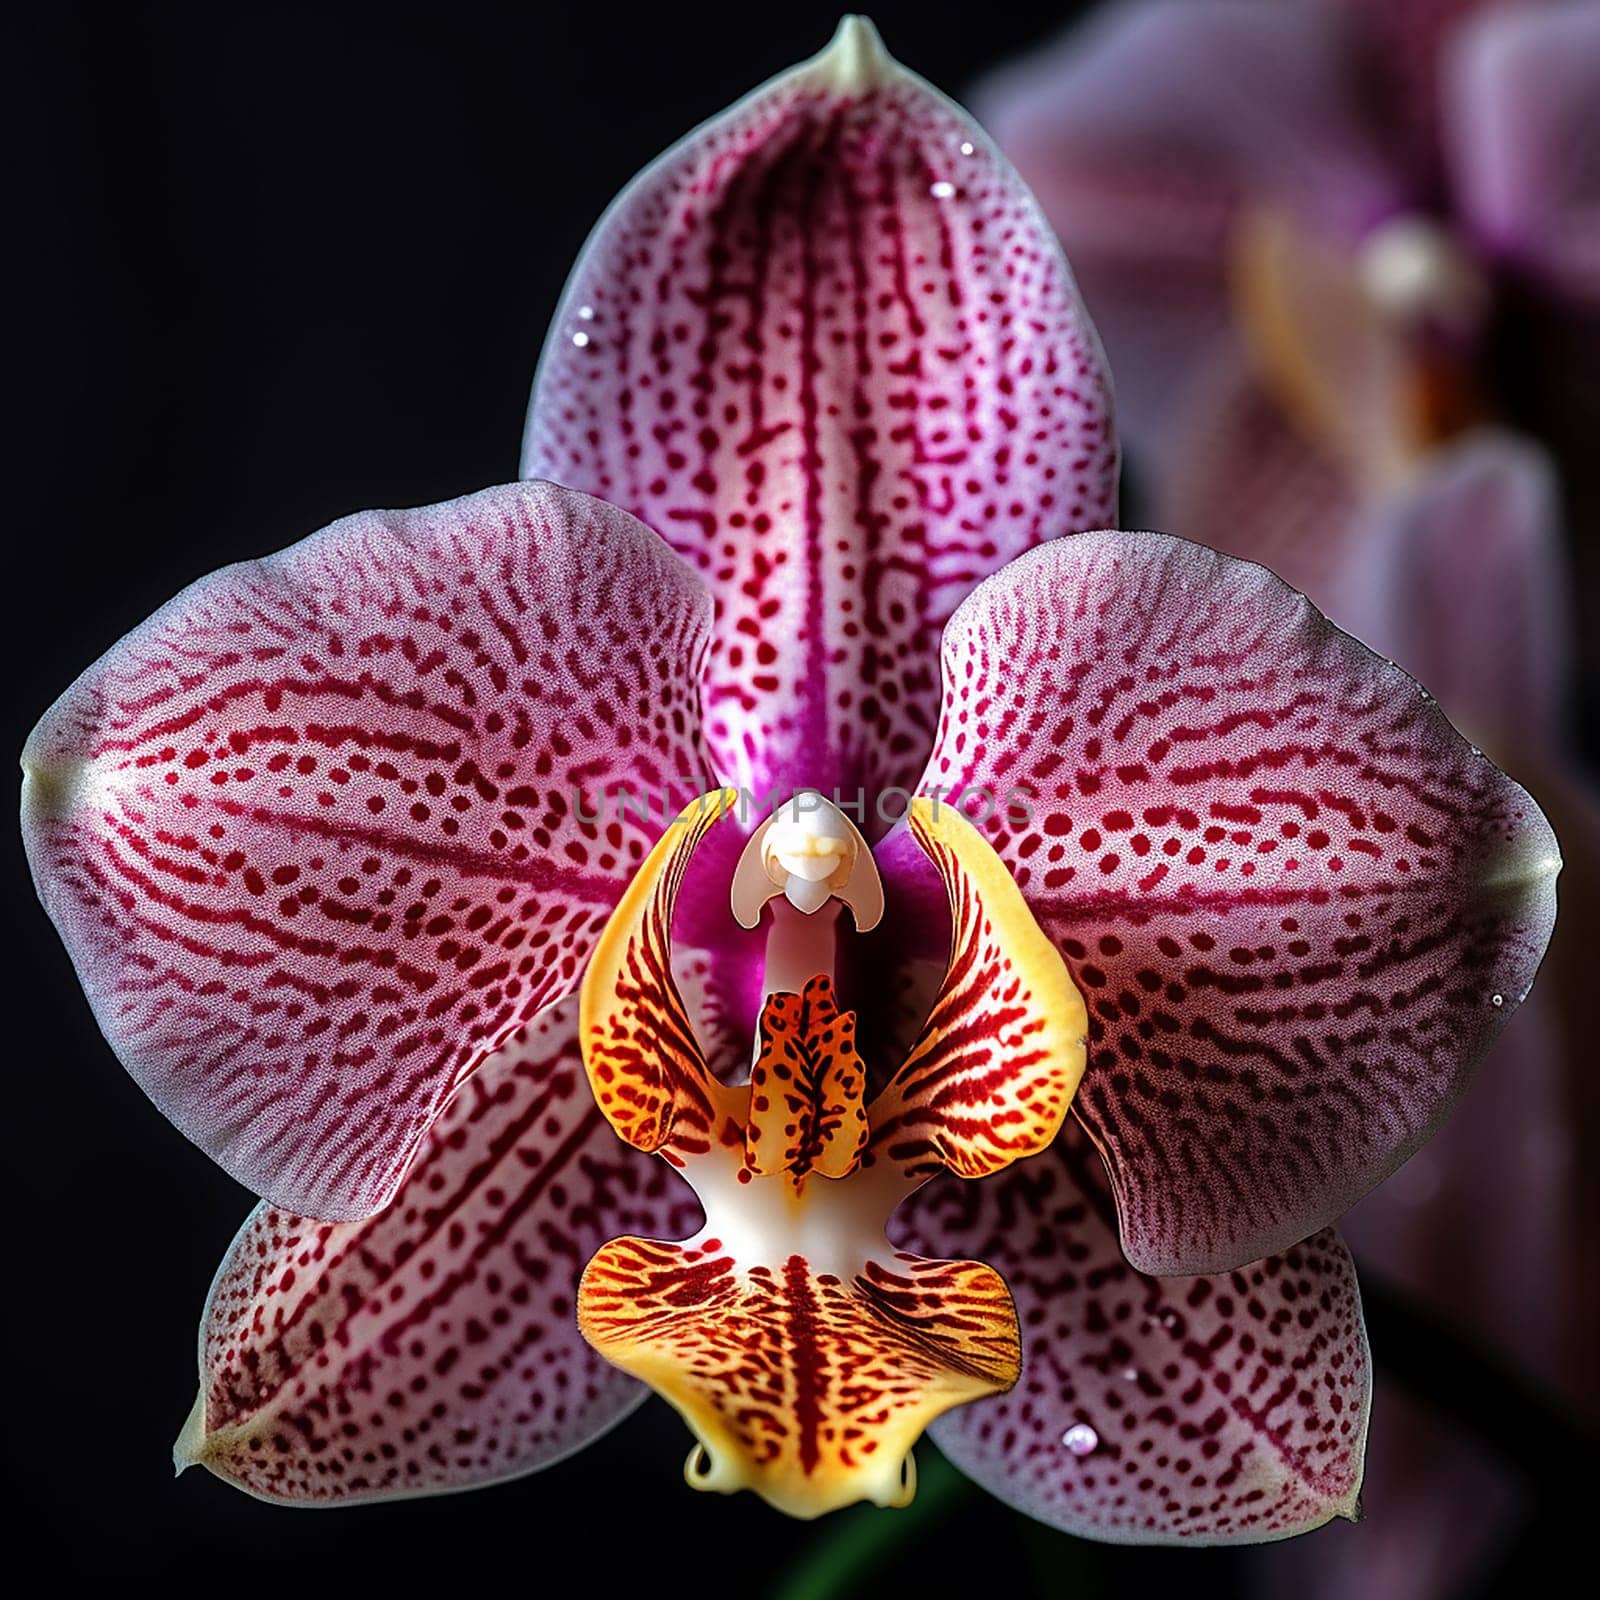 Close up of a spotted pink and white orchid with a dark background by Hype2art